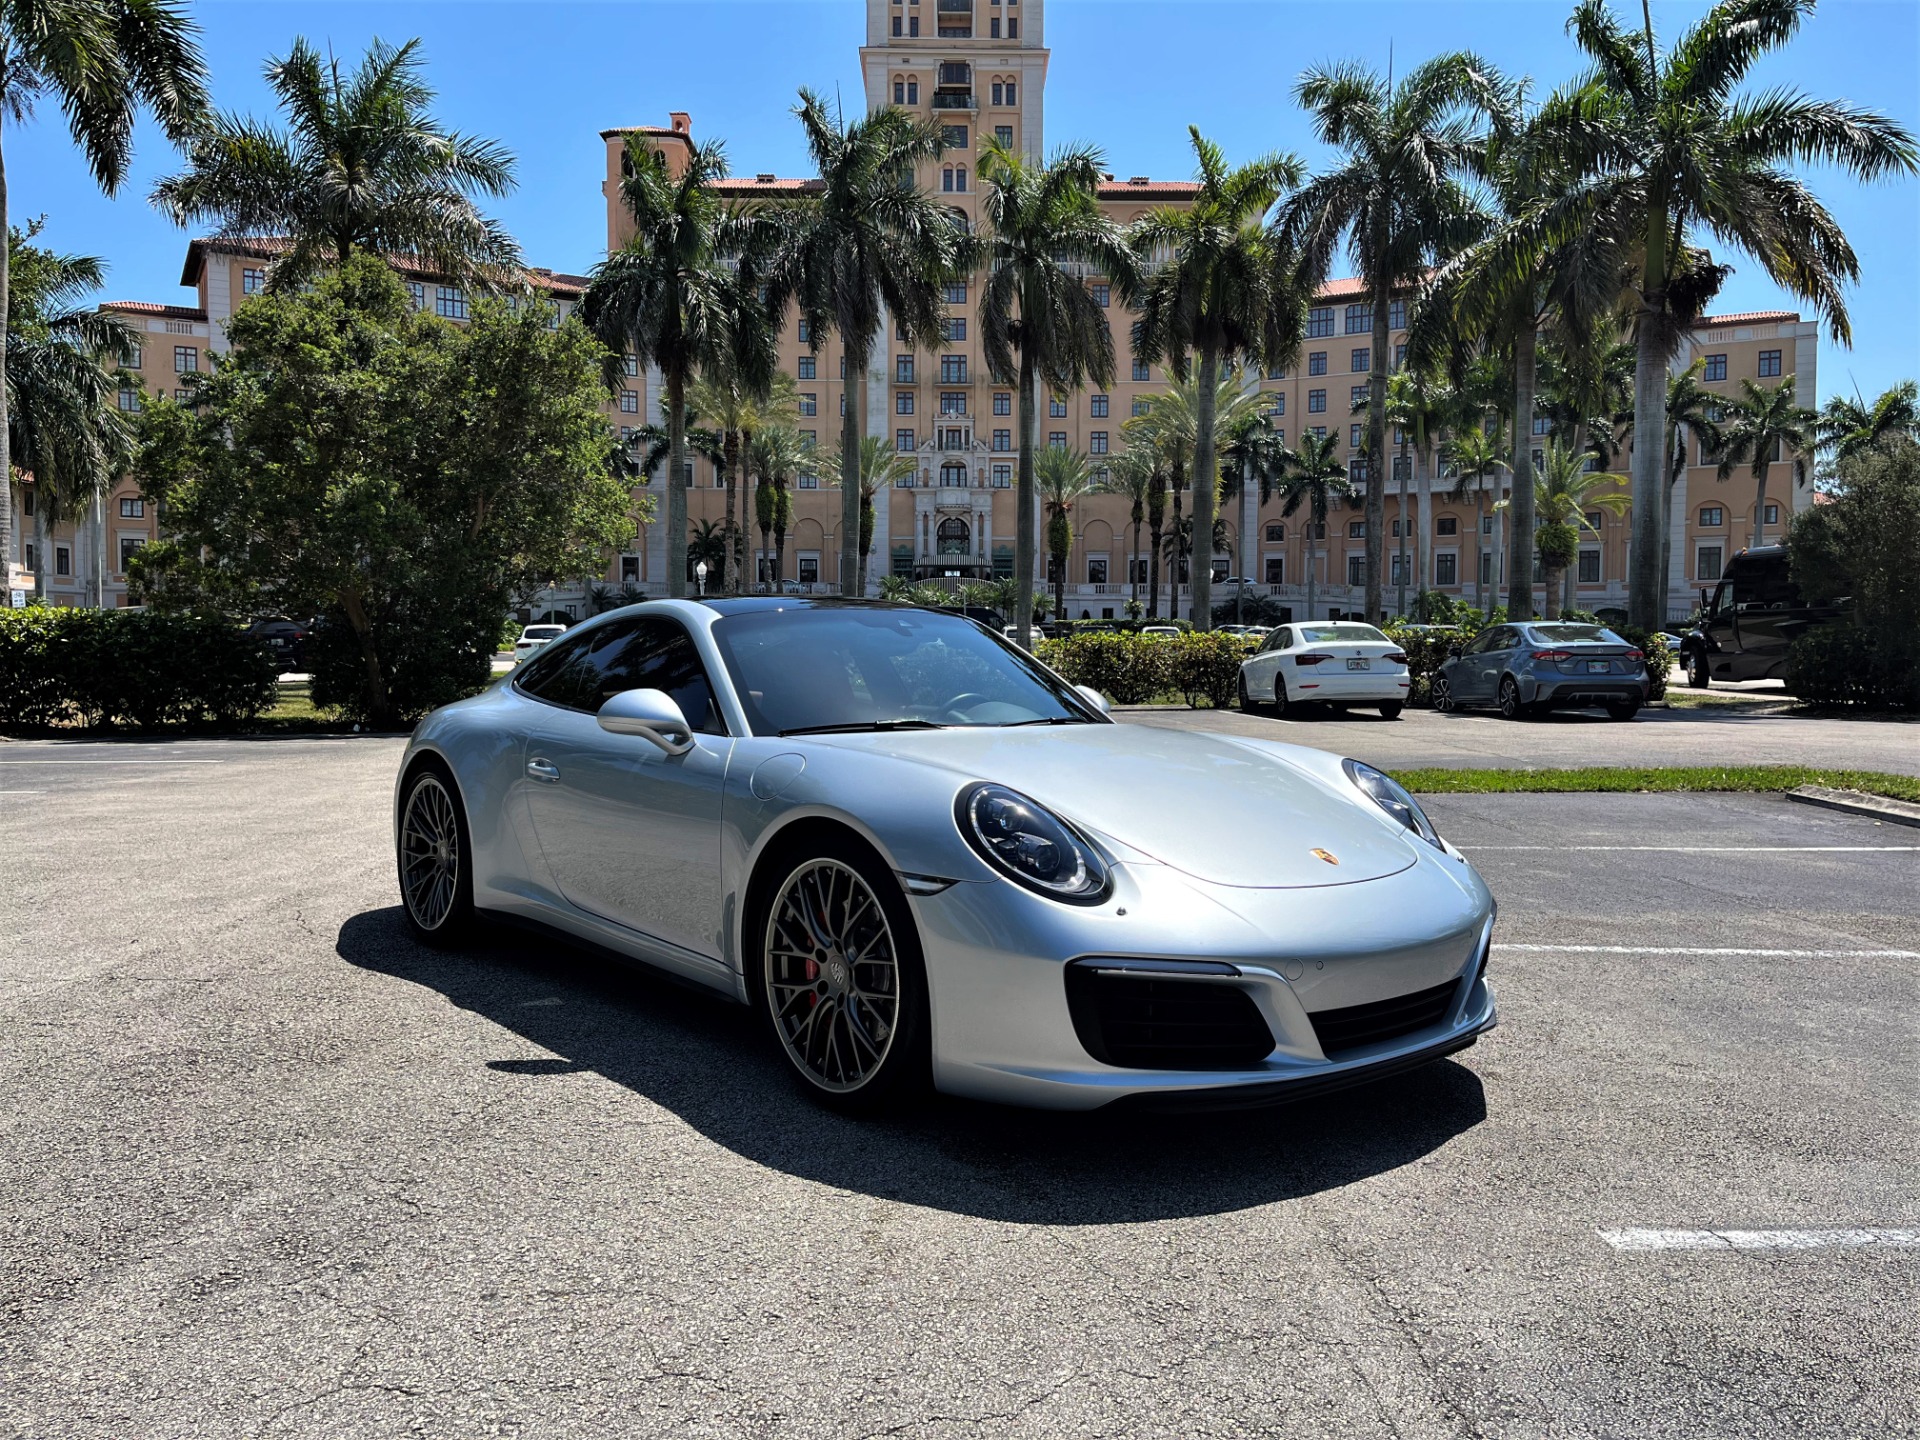 Used 2017 Porsche 911 Carrera 4S for sale Sold at The Gables Sports Cars in Miami FL 33146 1